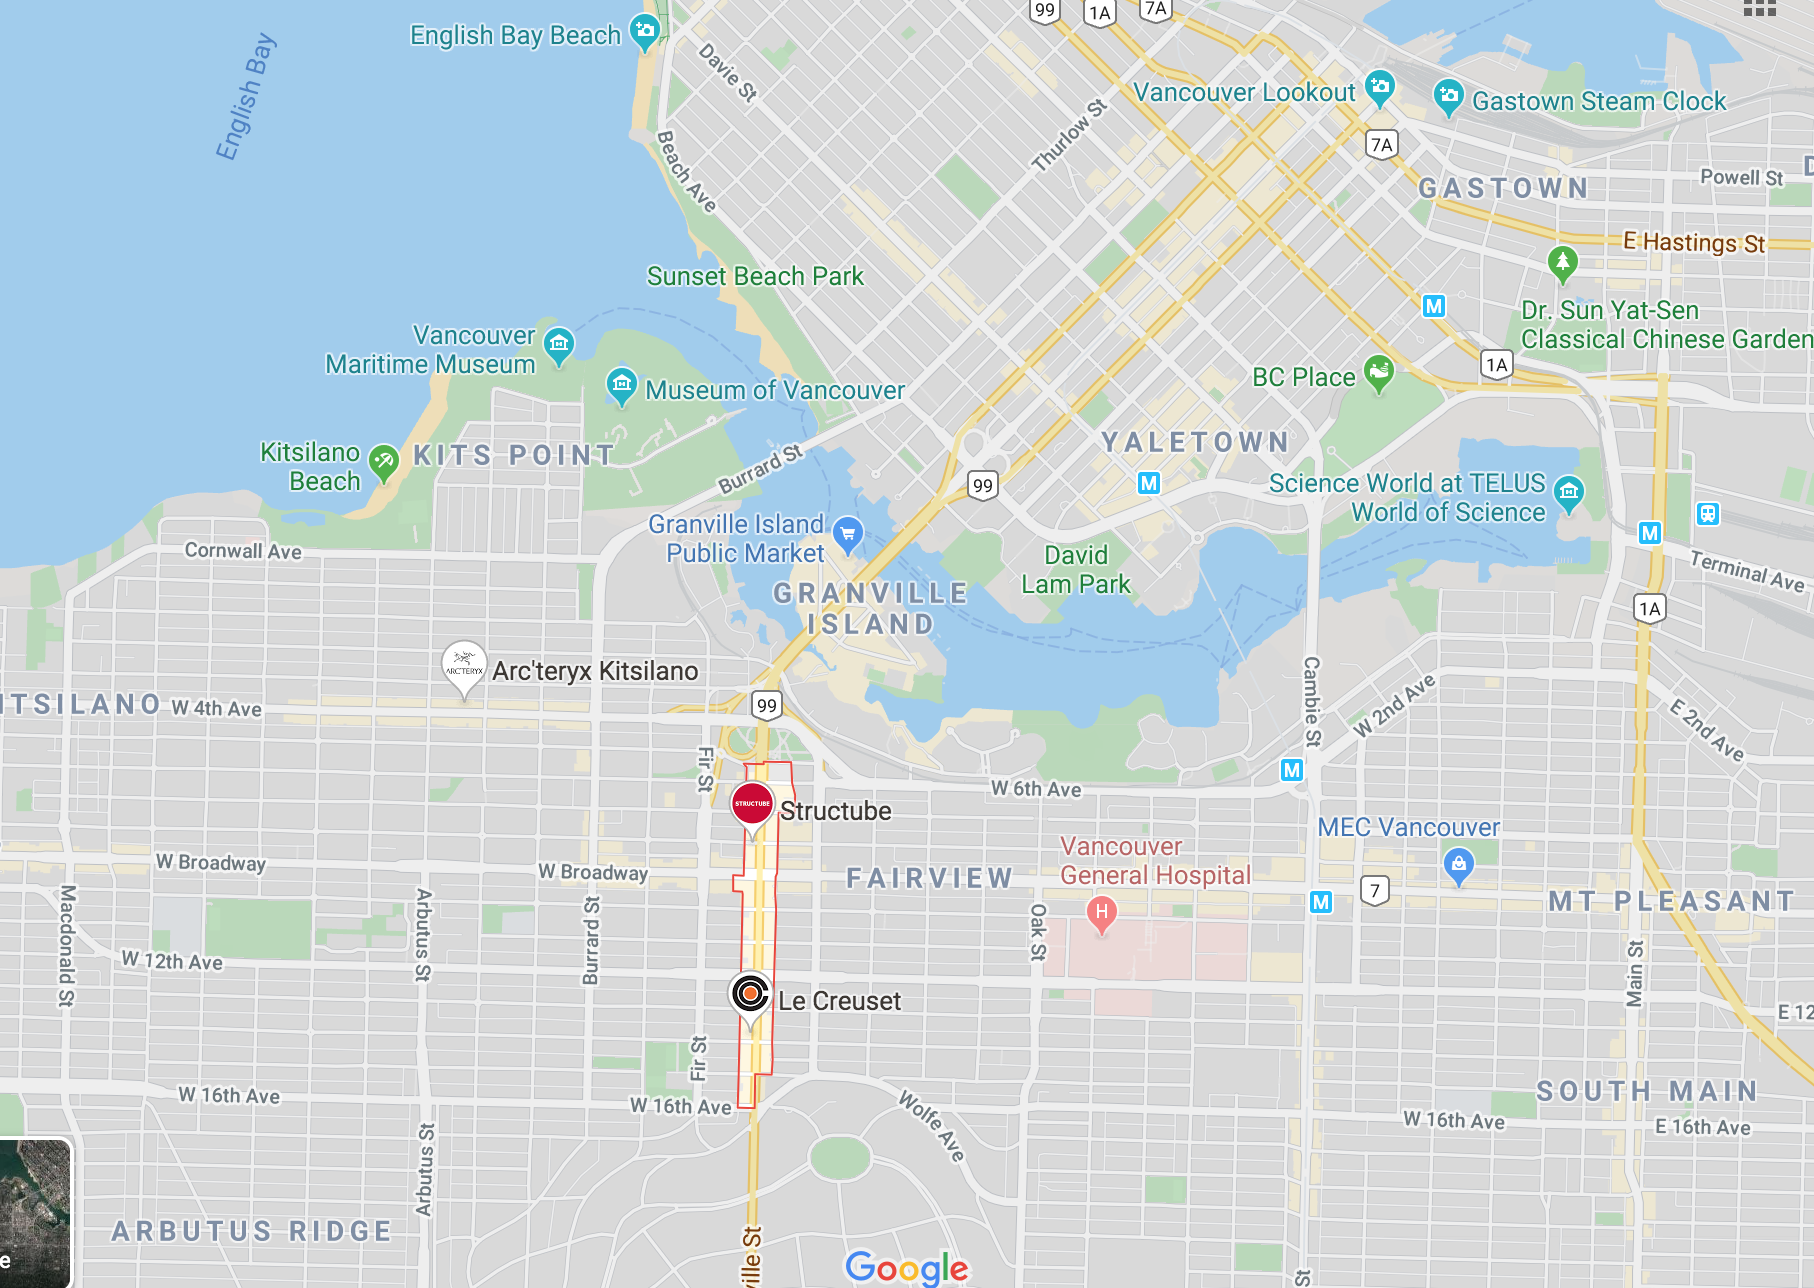   CLICK FOR INTERACTIVE MAP OF SOUTH GRANVILLE, VANCOUVER  